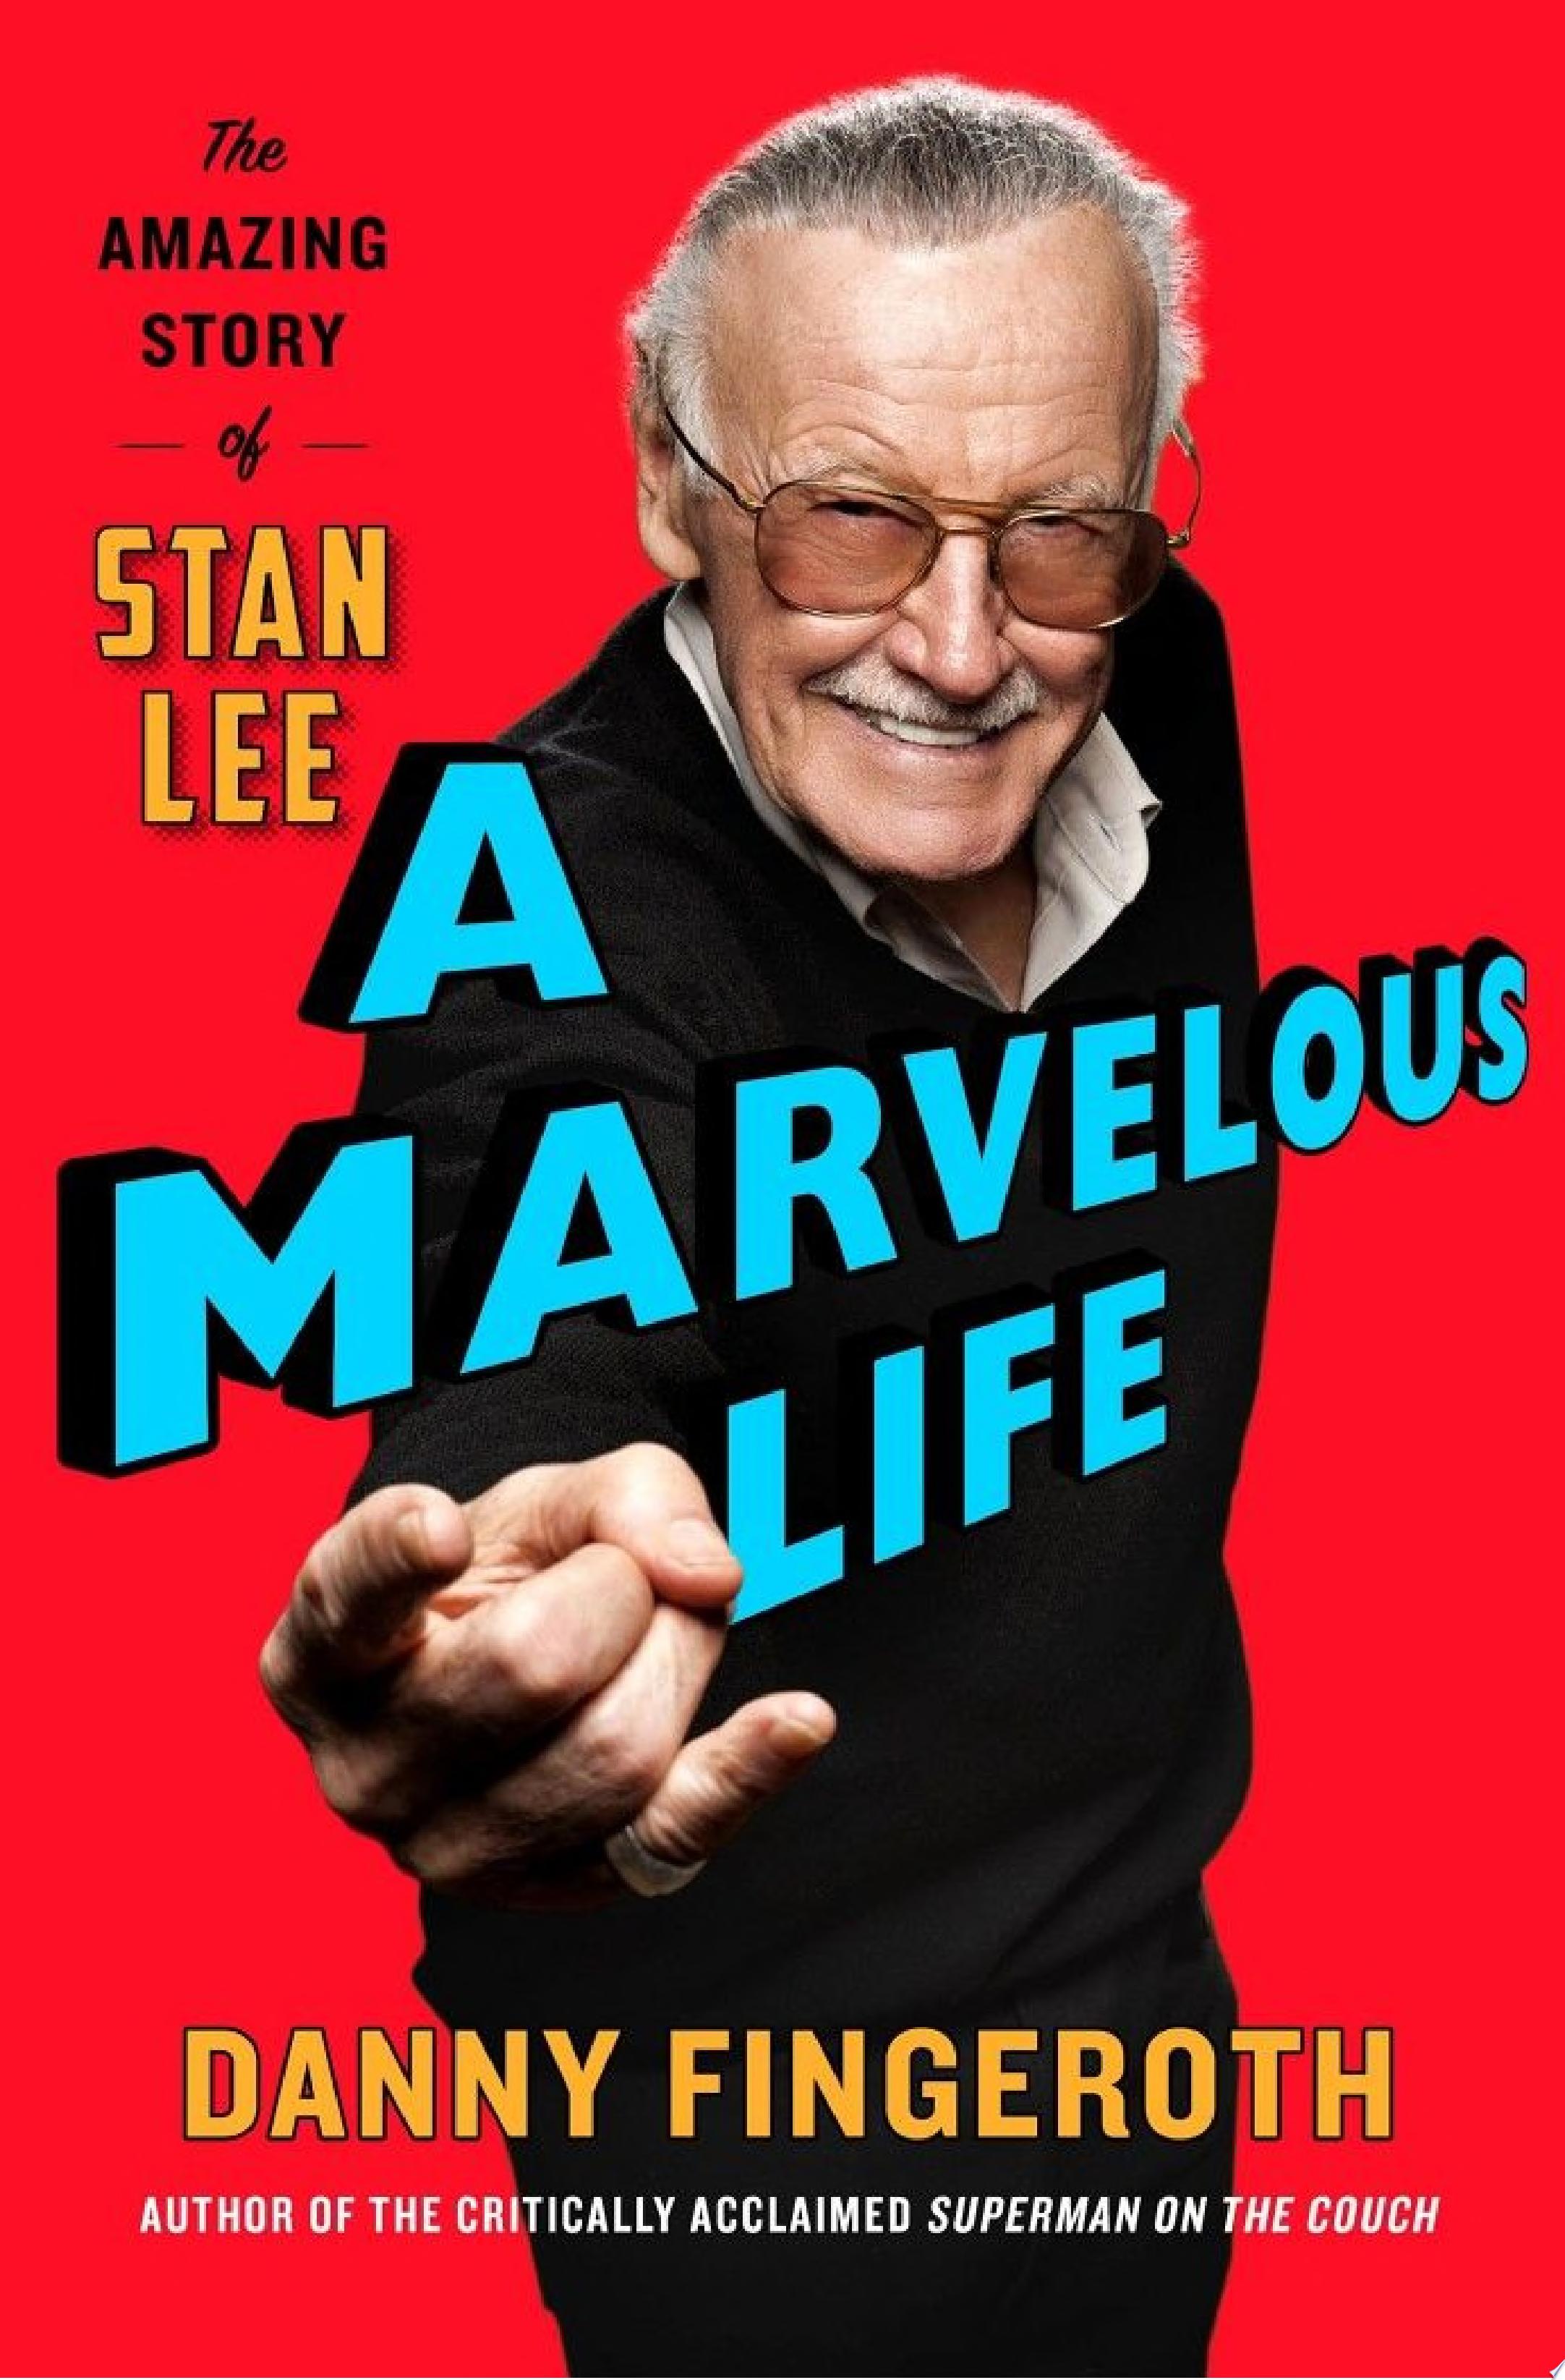 Image for "A Marvelous Life"